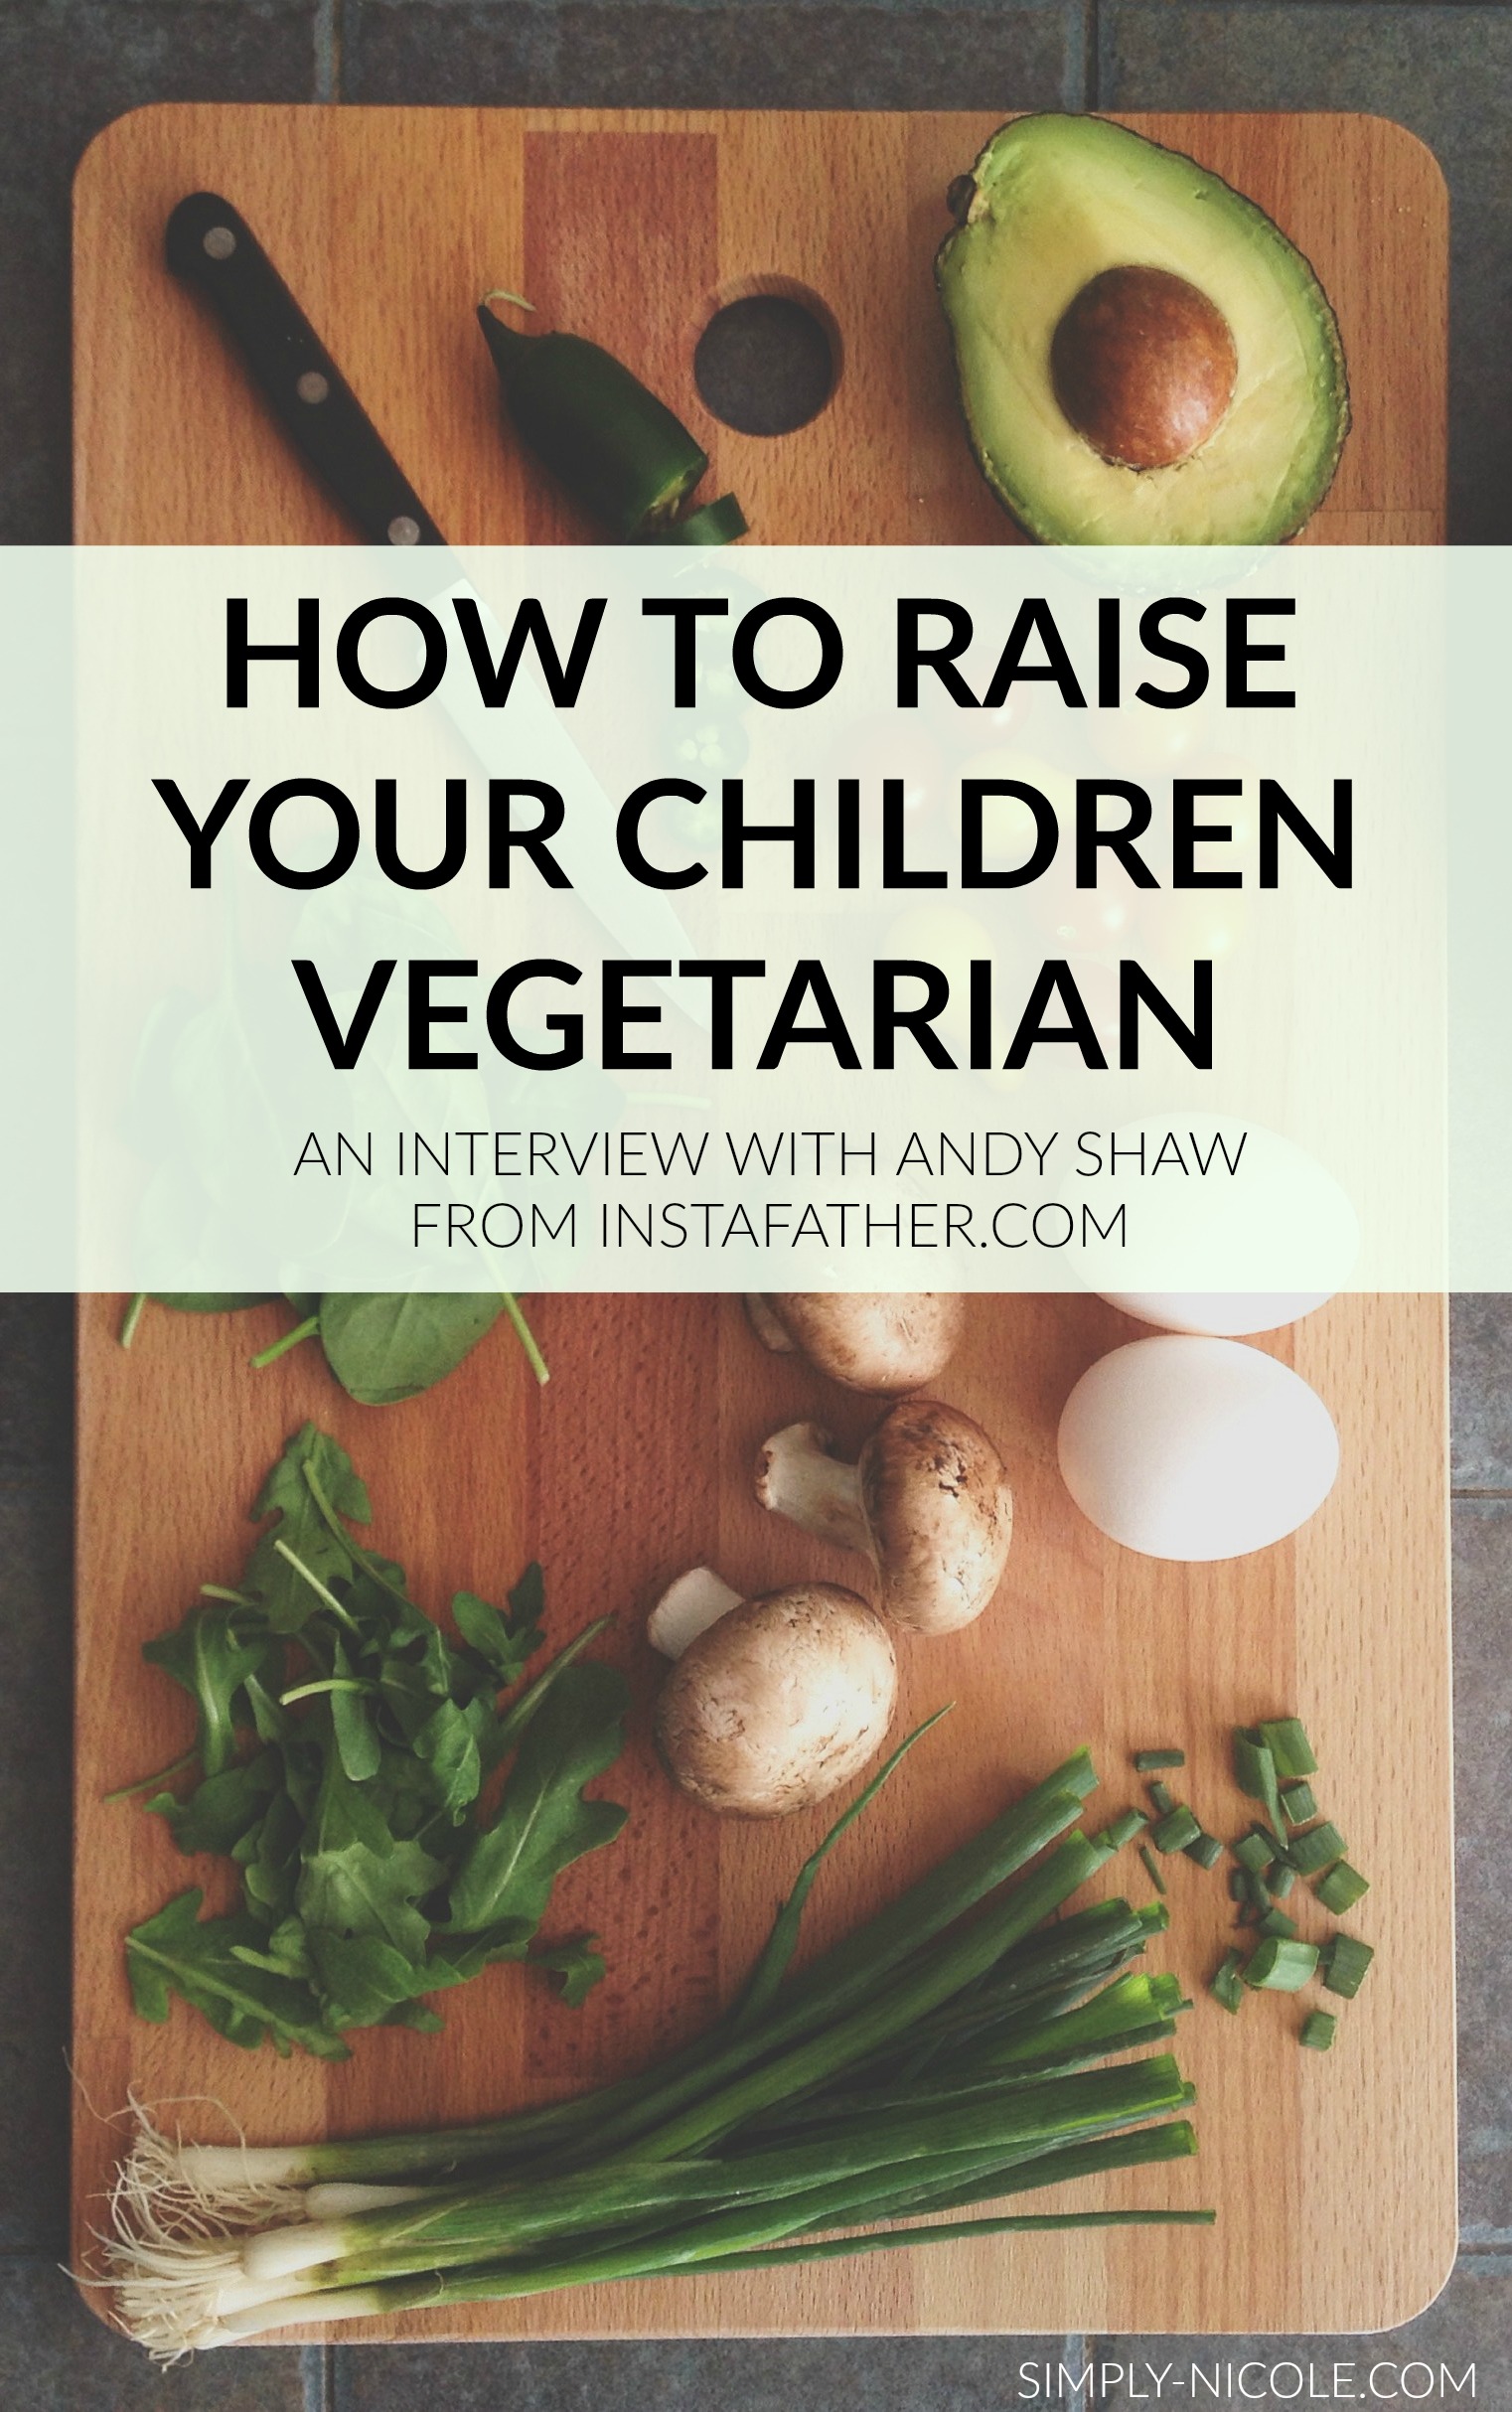 Raising your children vegetarian, an interview with Andy Shaw via simply-nicole.com